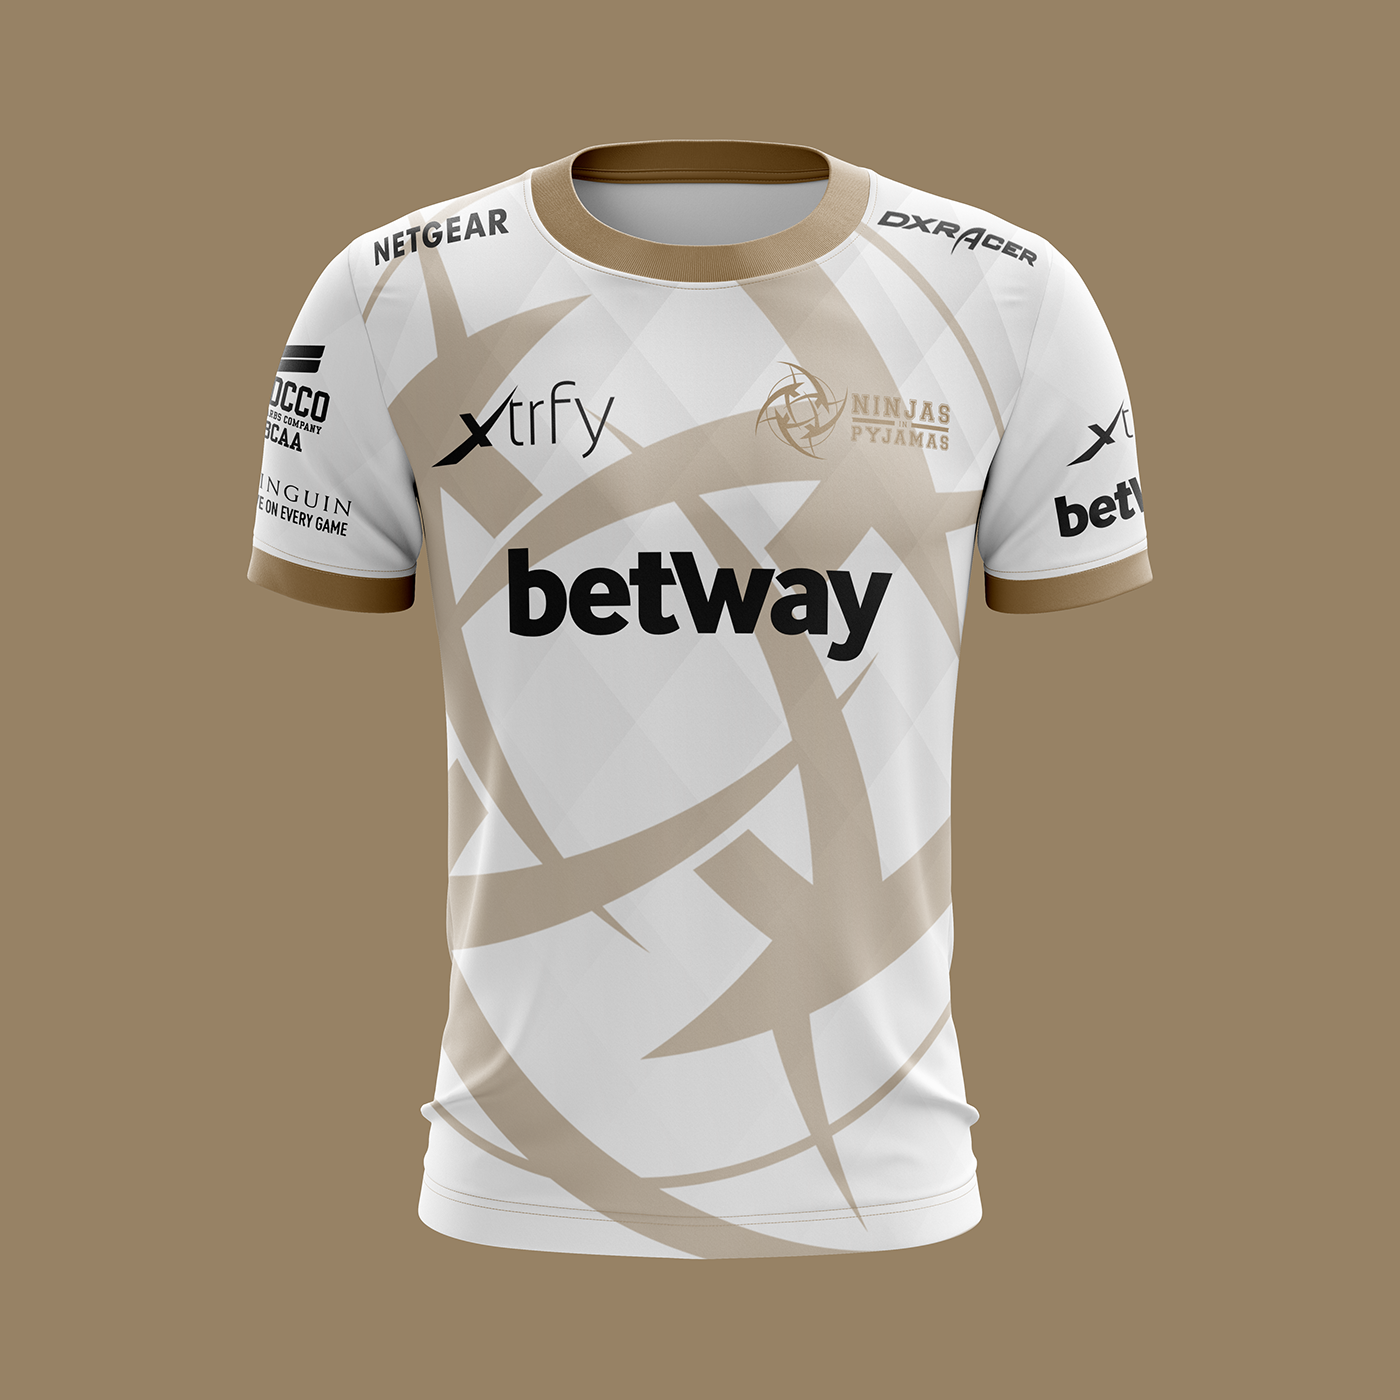 Download Esports Jersey Mockups on Behance